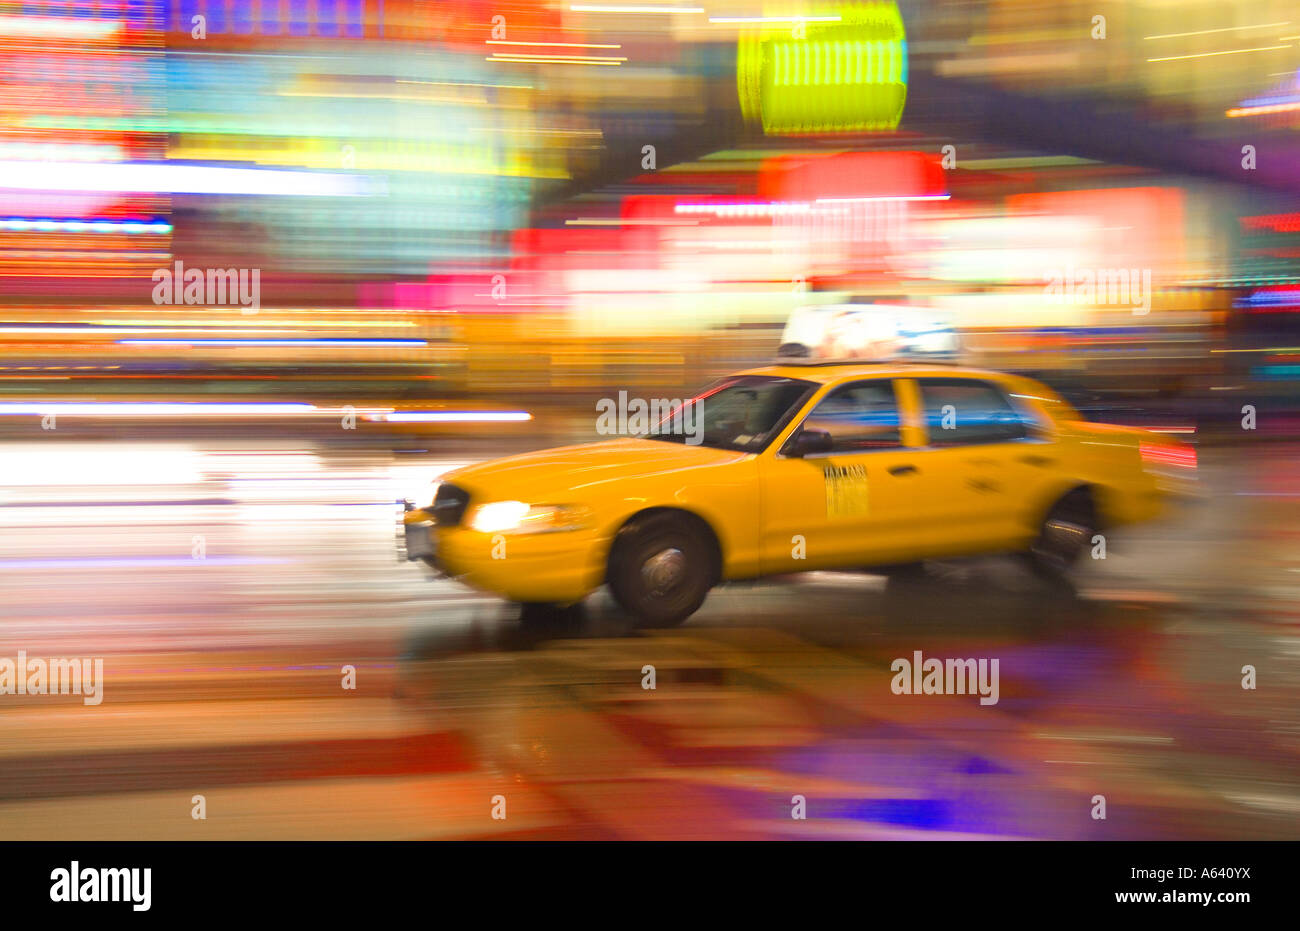 Taxi Cab, New York City At Night With Motion Blur And Bright Lights, Times Square, New York City, USA Stock Photo